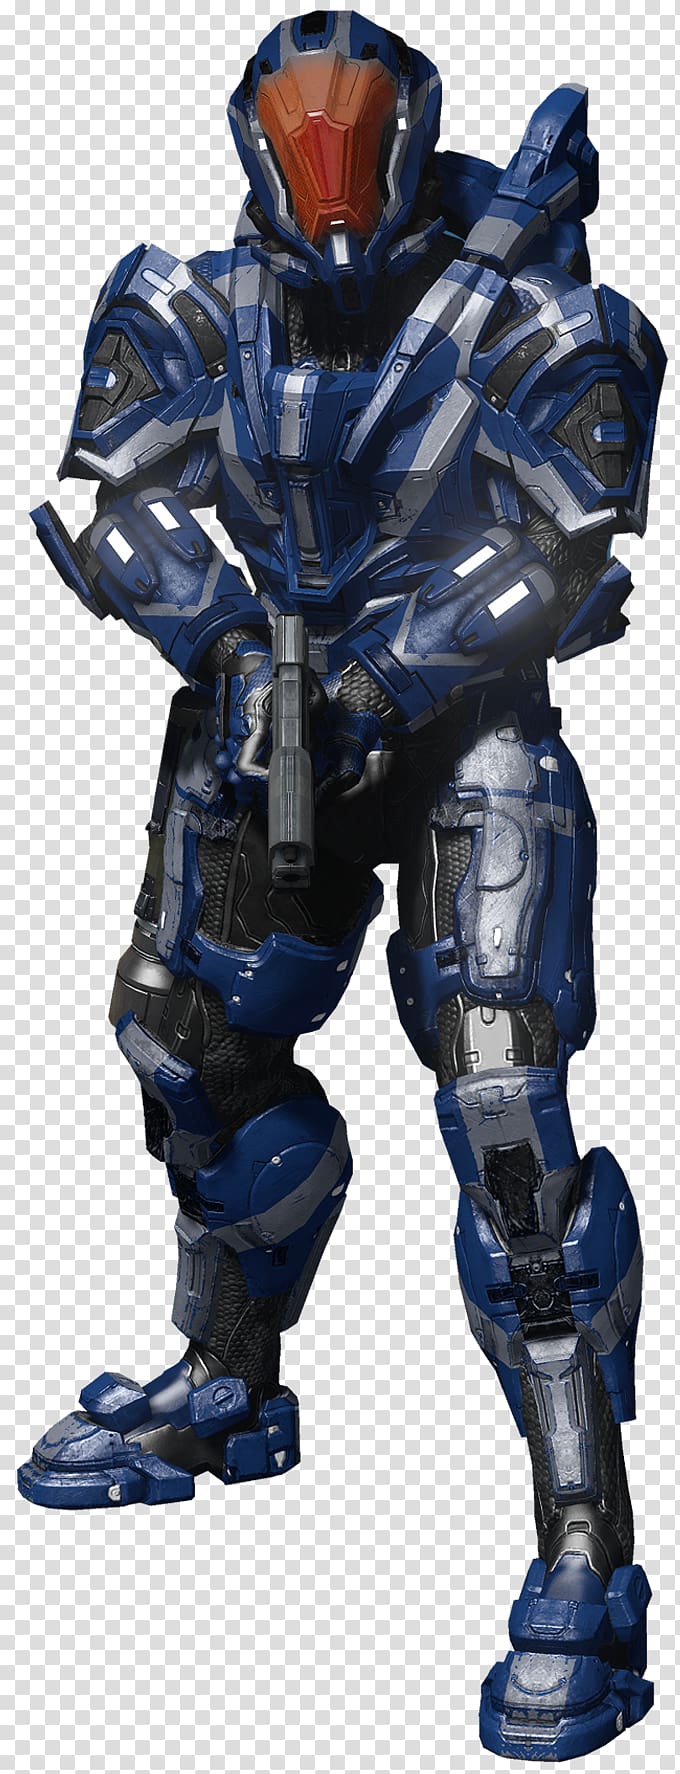 Halo 4 Halo 5: Guardians Halo Wars 2 Halo 3 Halo 2, armour transparent background PNG clipart